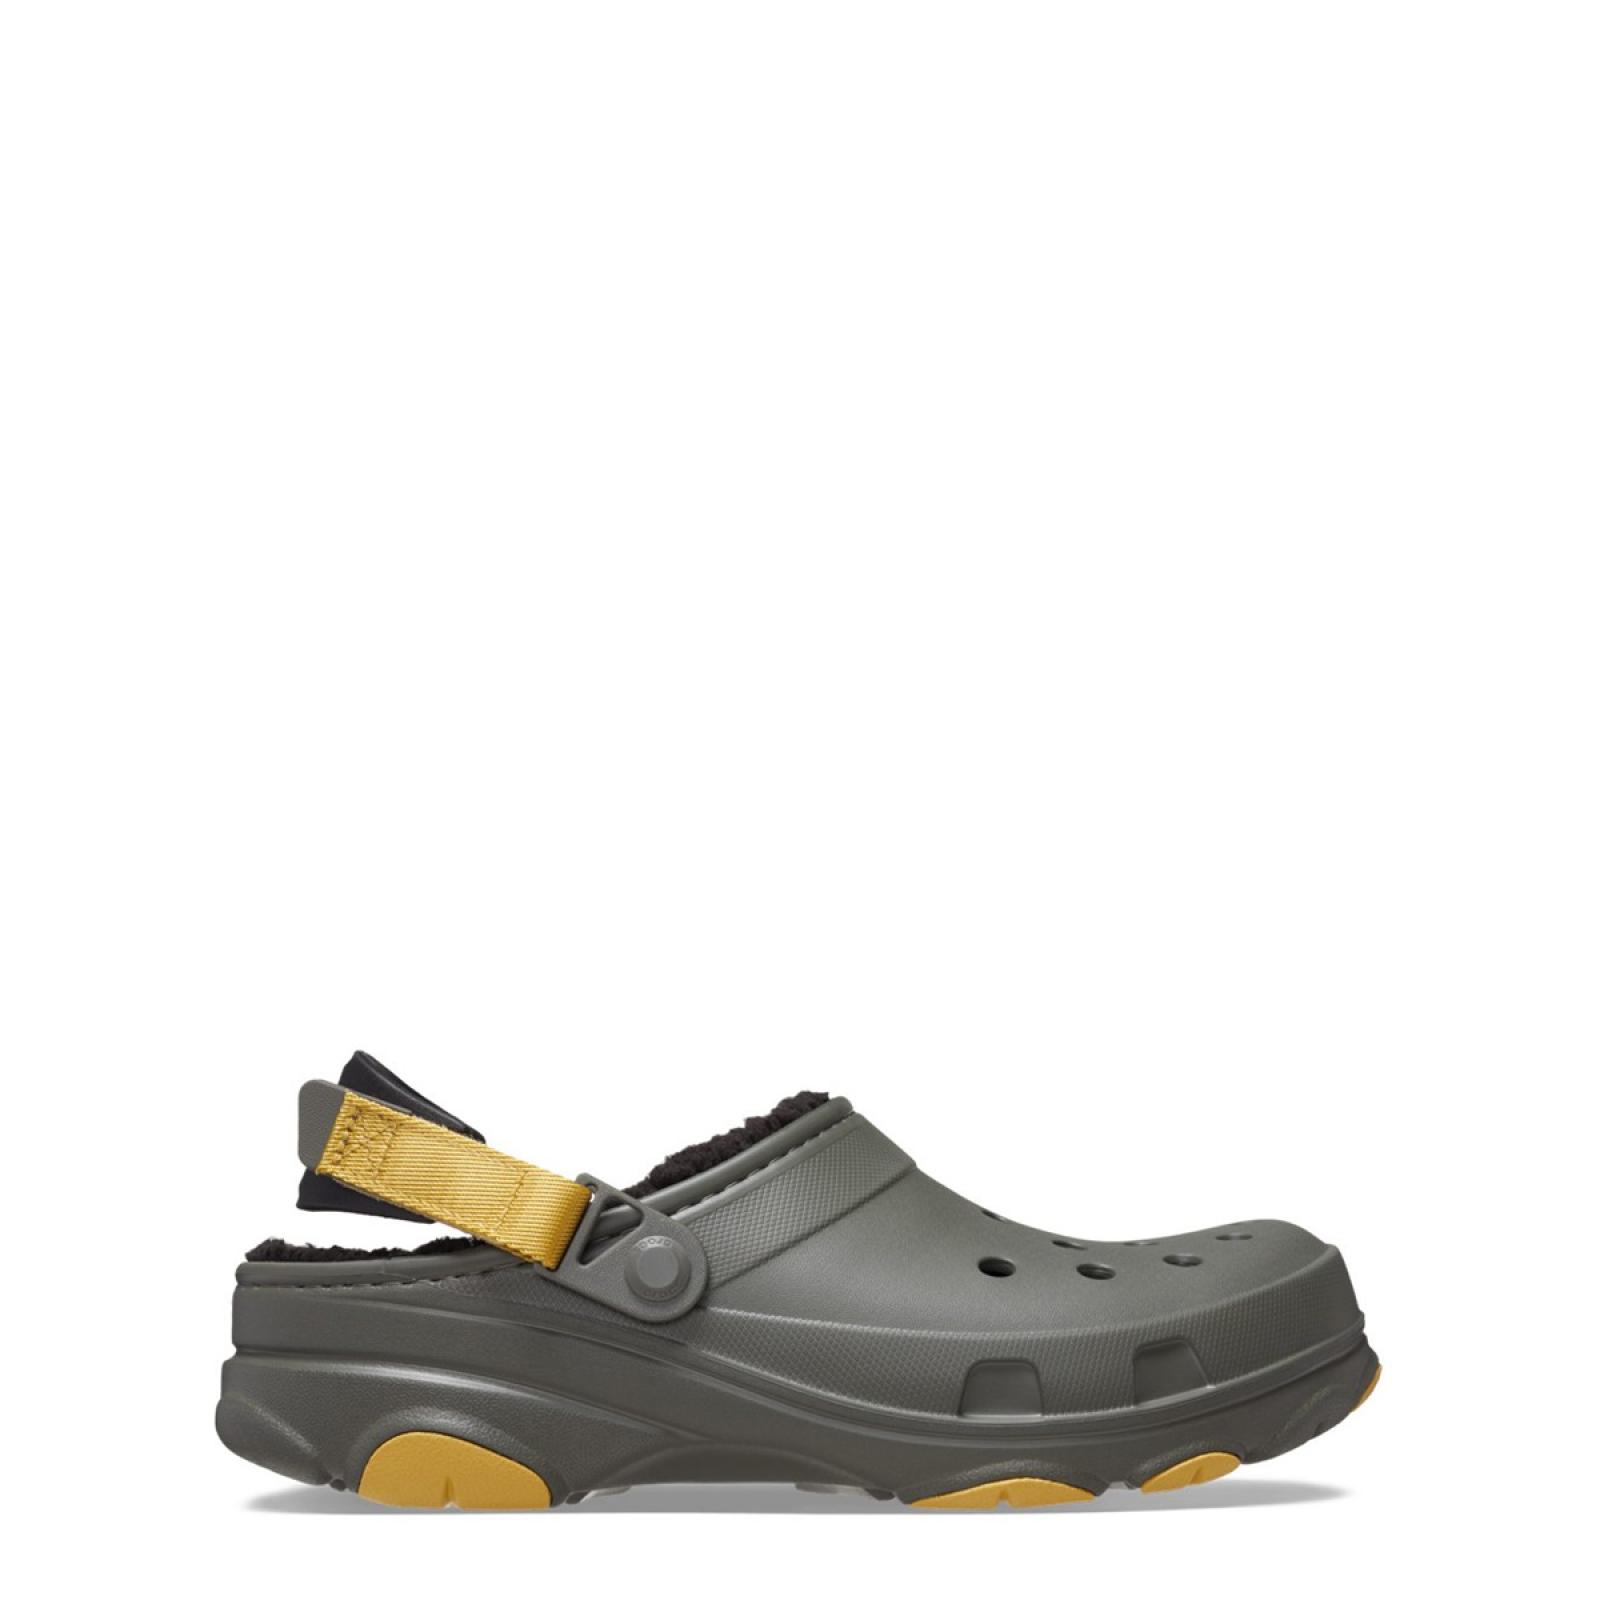 Crocs All Terrain Lined Dusty Olive - 1